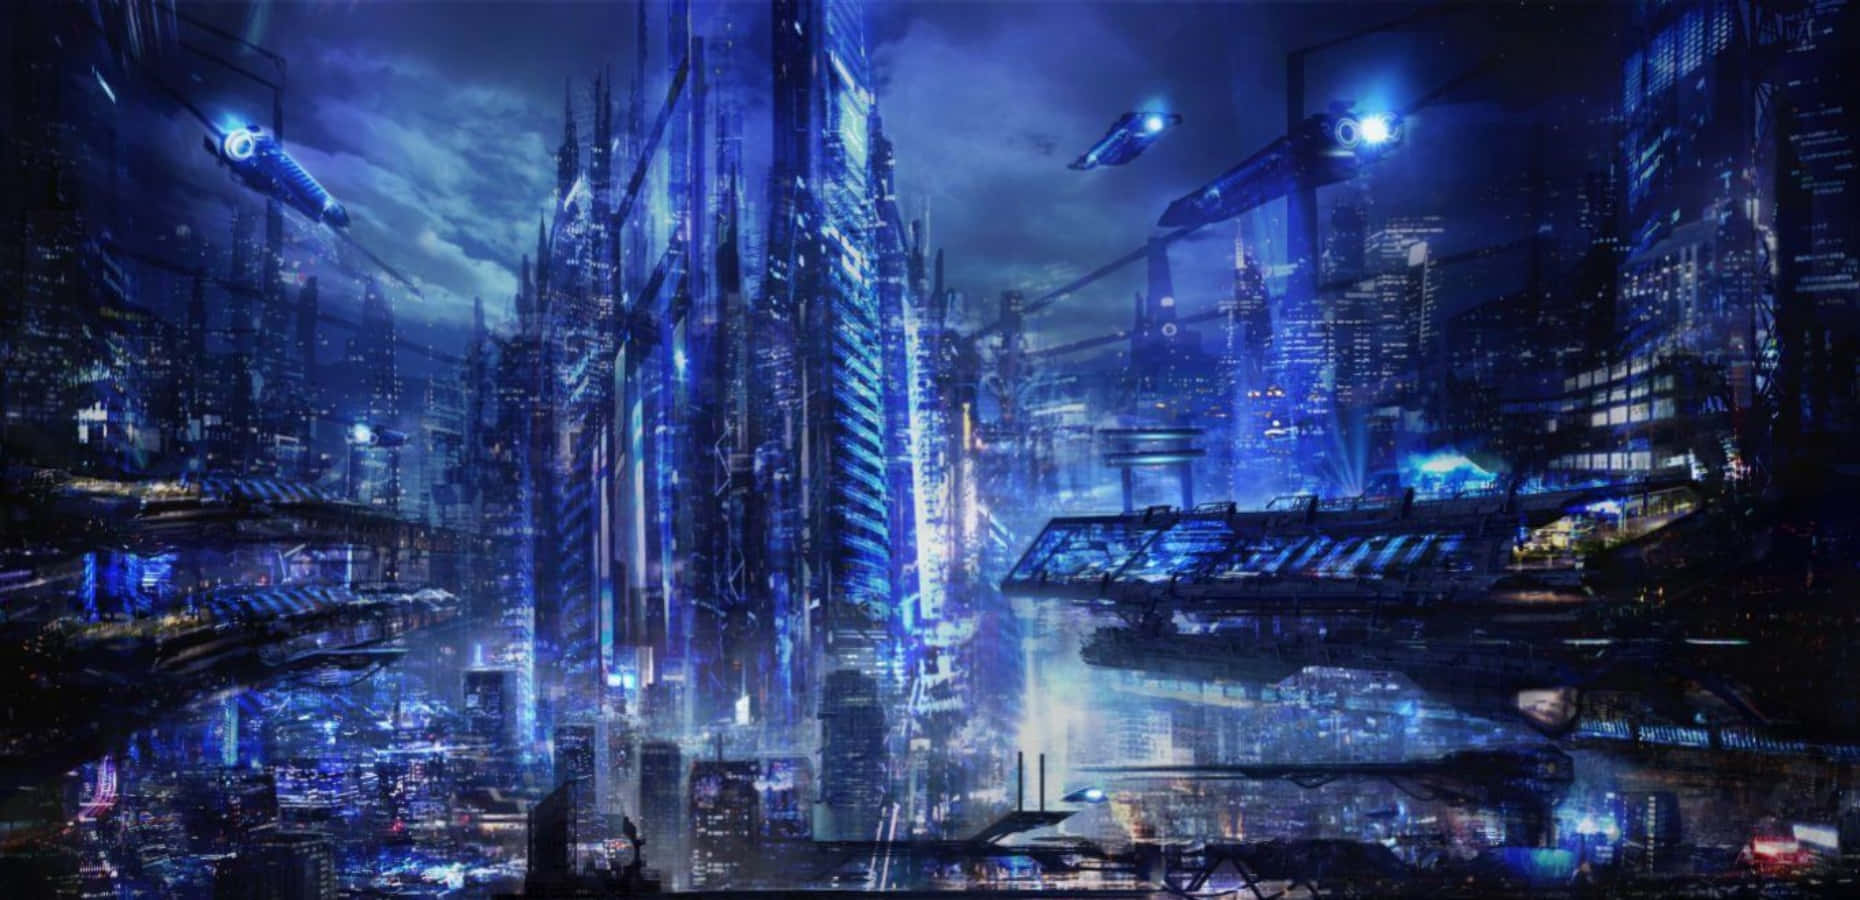 Future Buildings With Blue Lights Picture